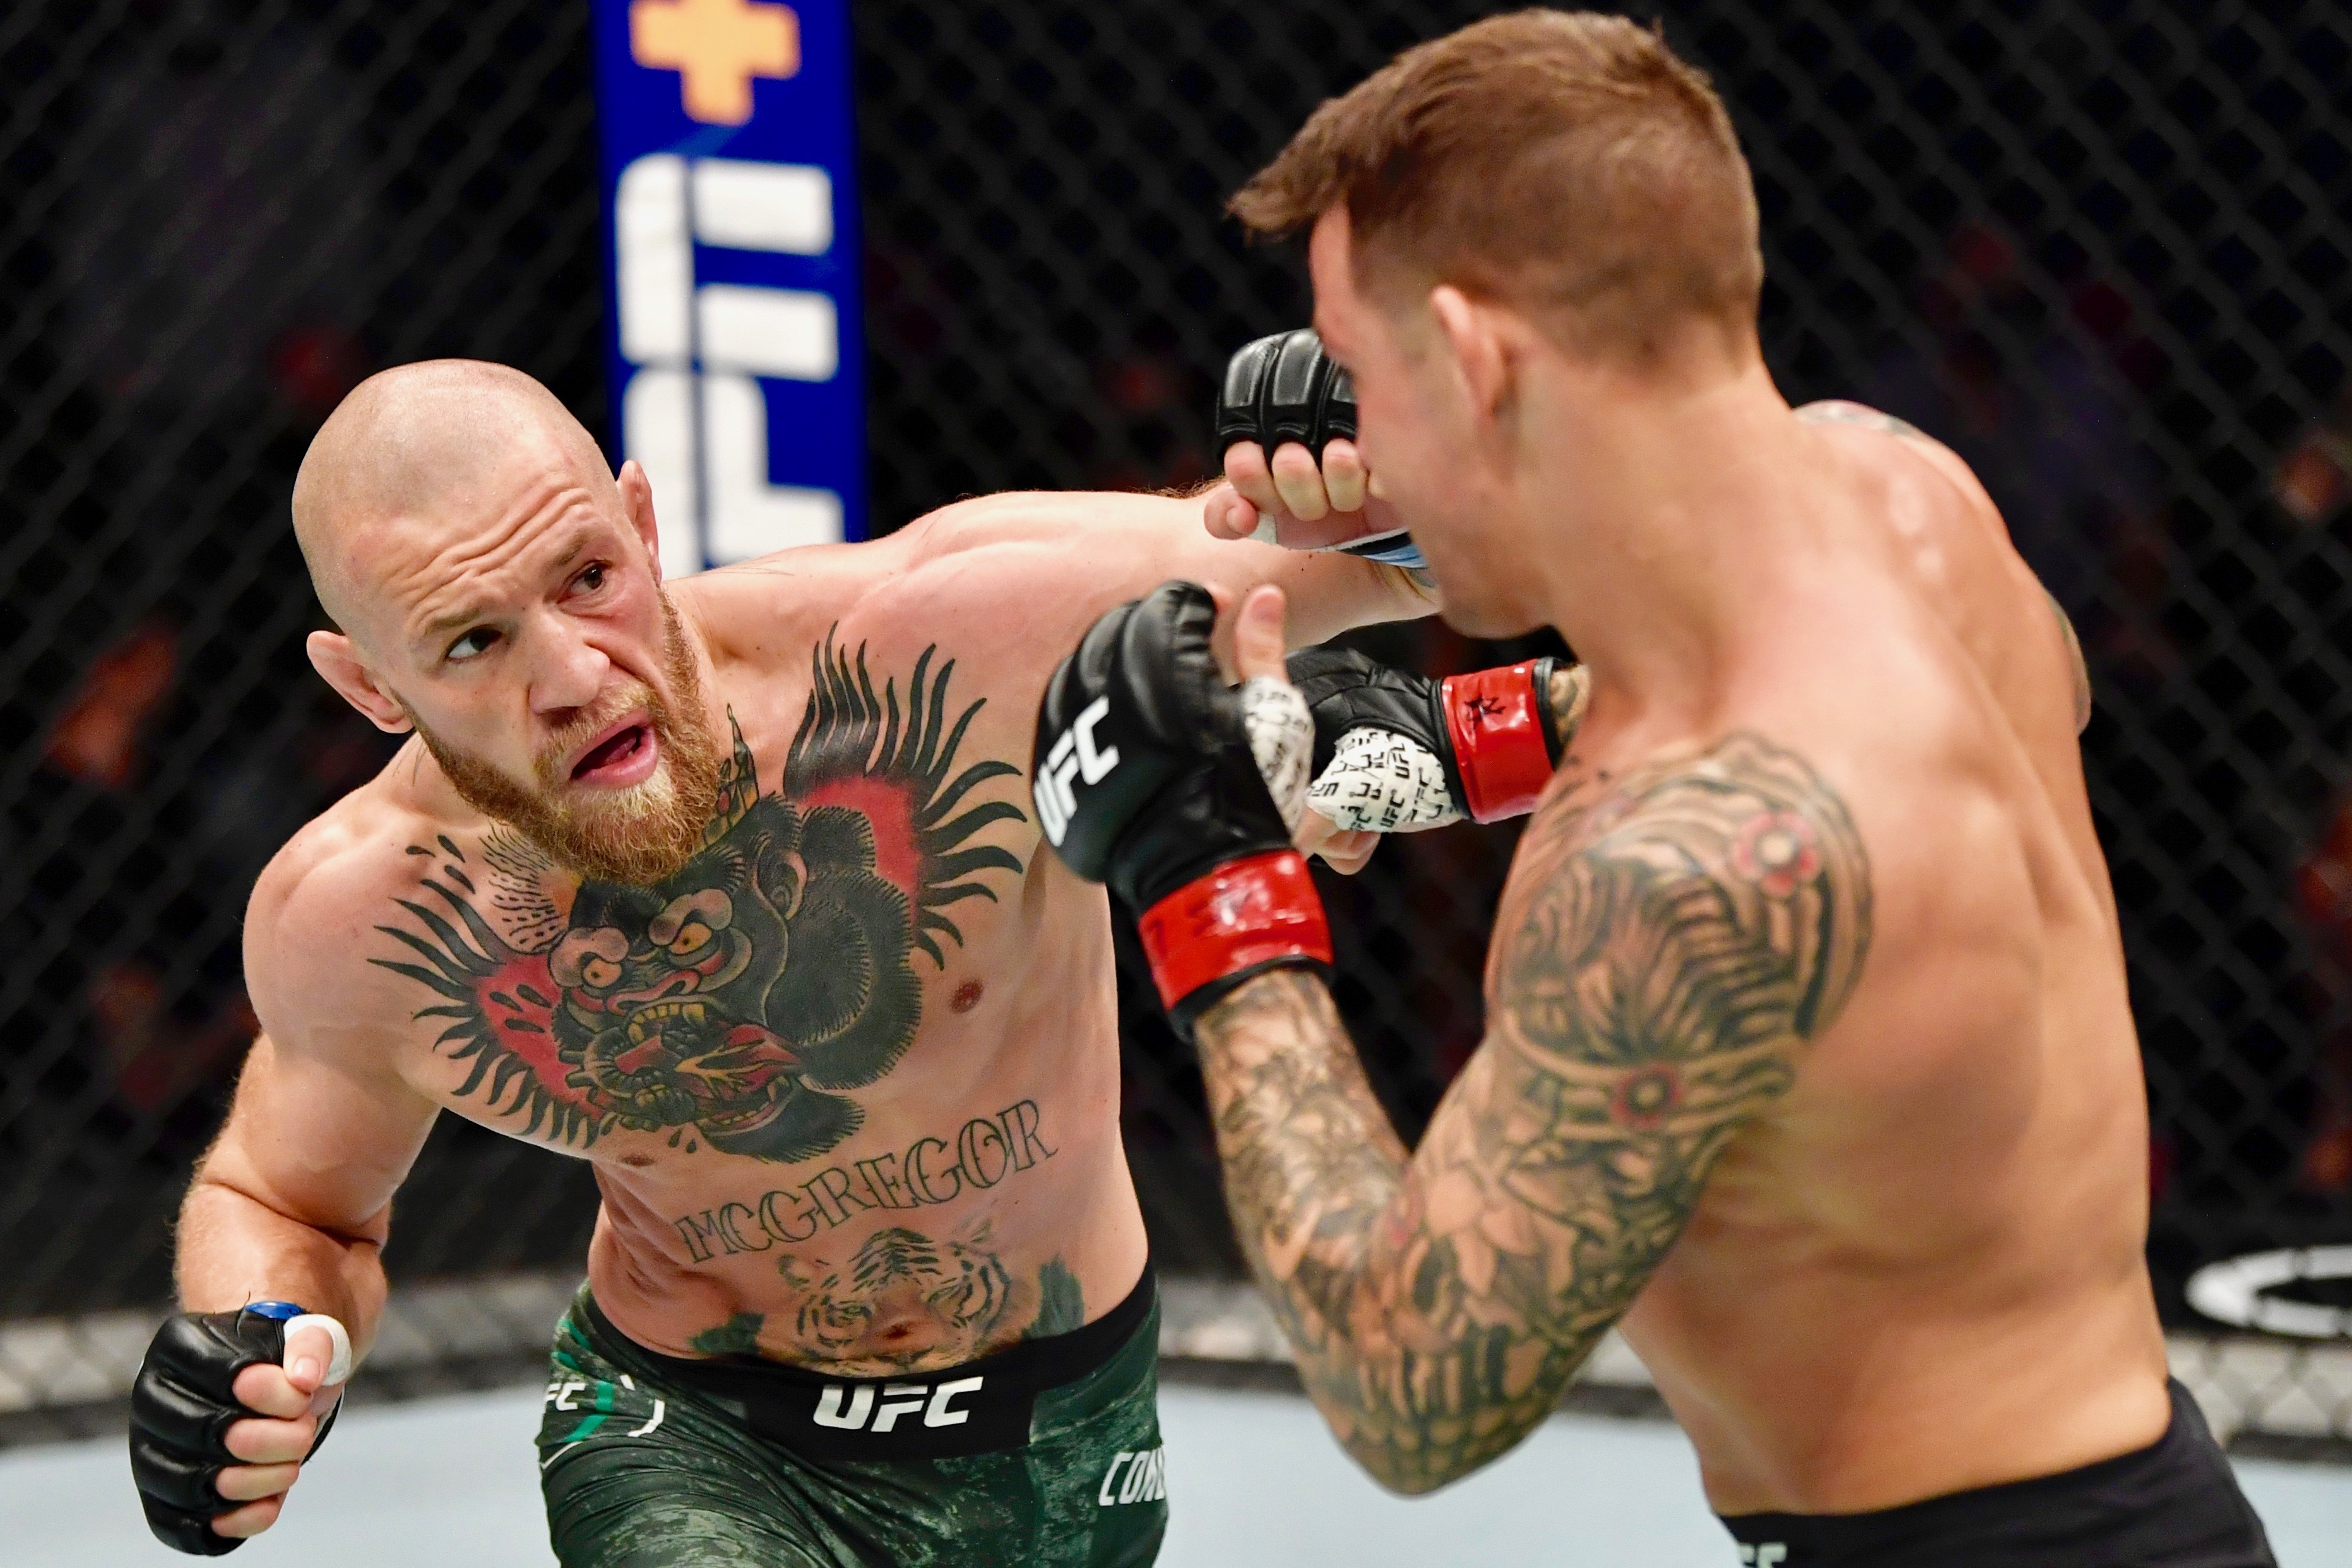 Conor McGregor: bio, net worth, fighting style and UFC 257 rematch